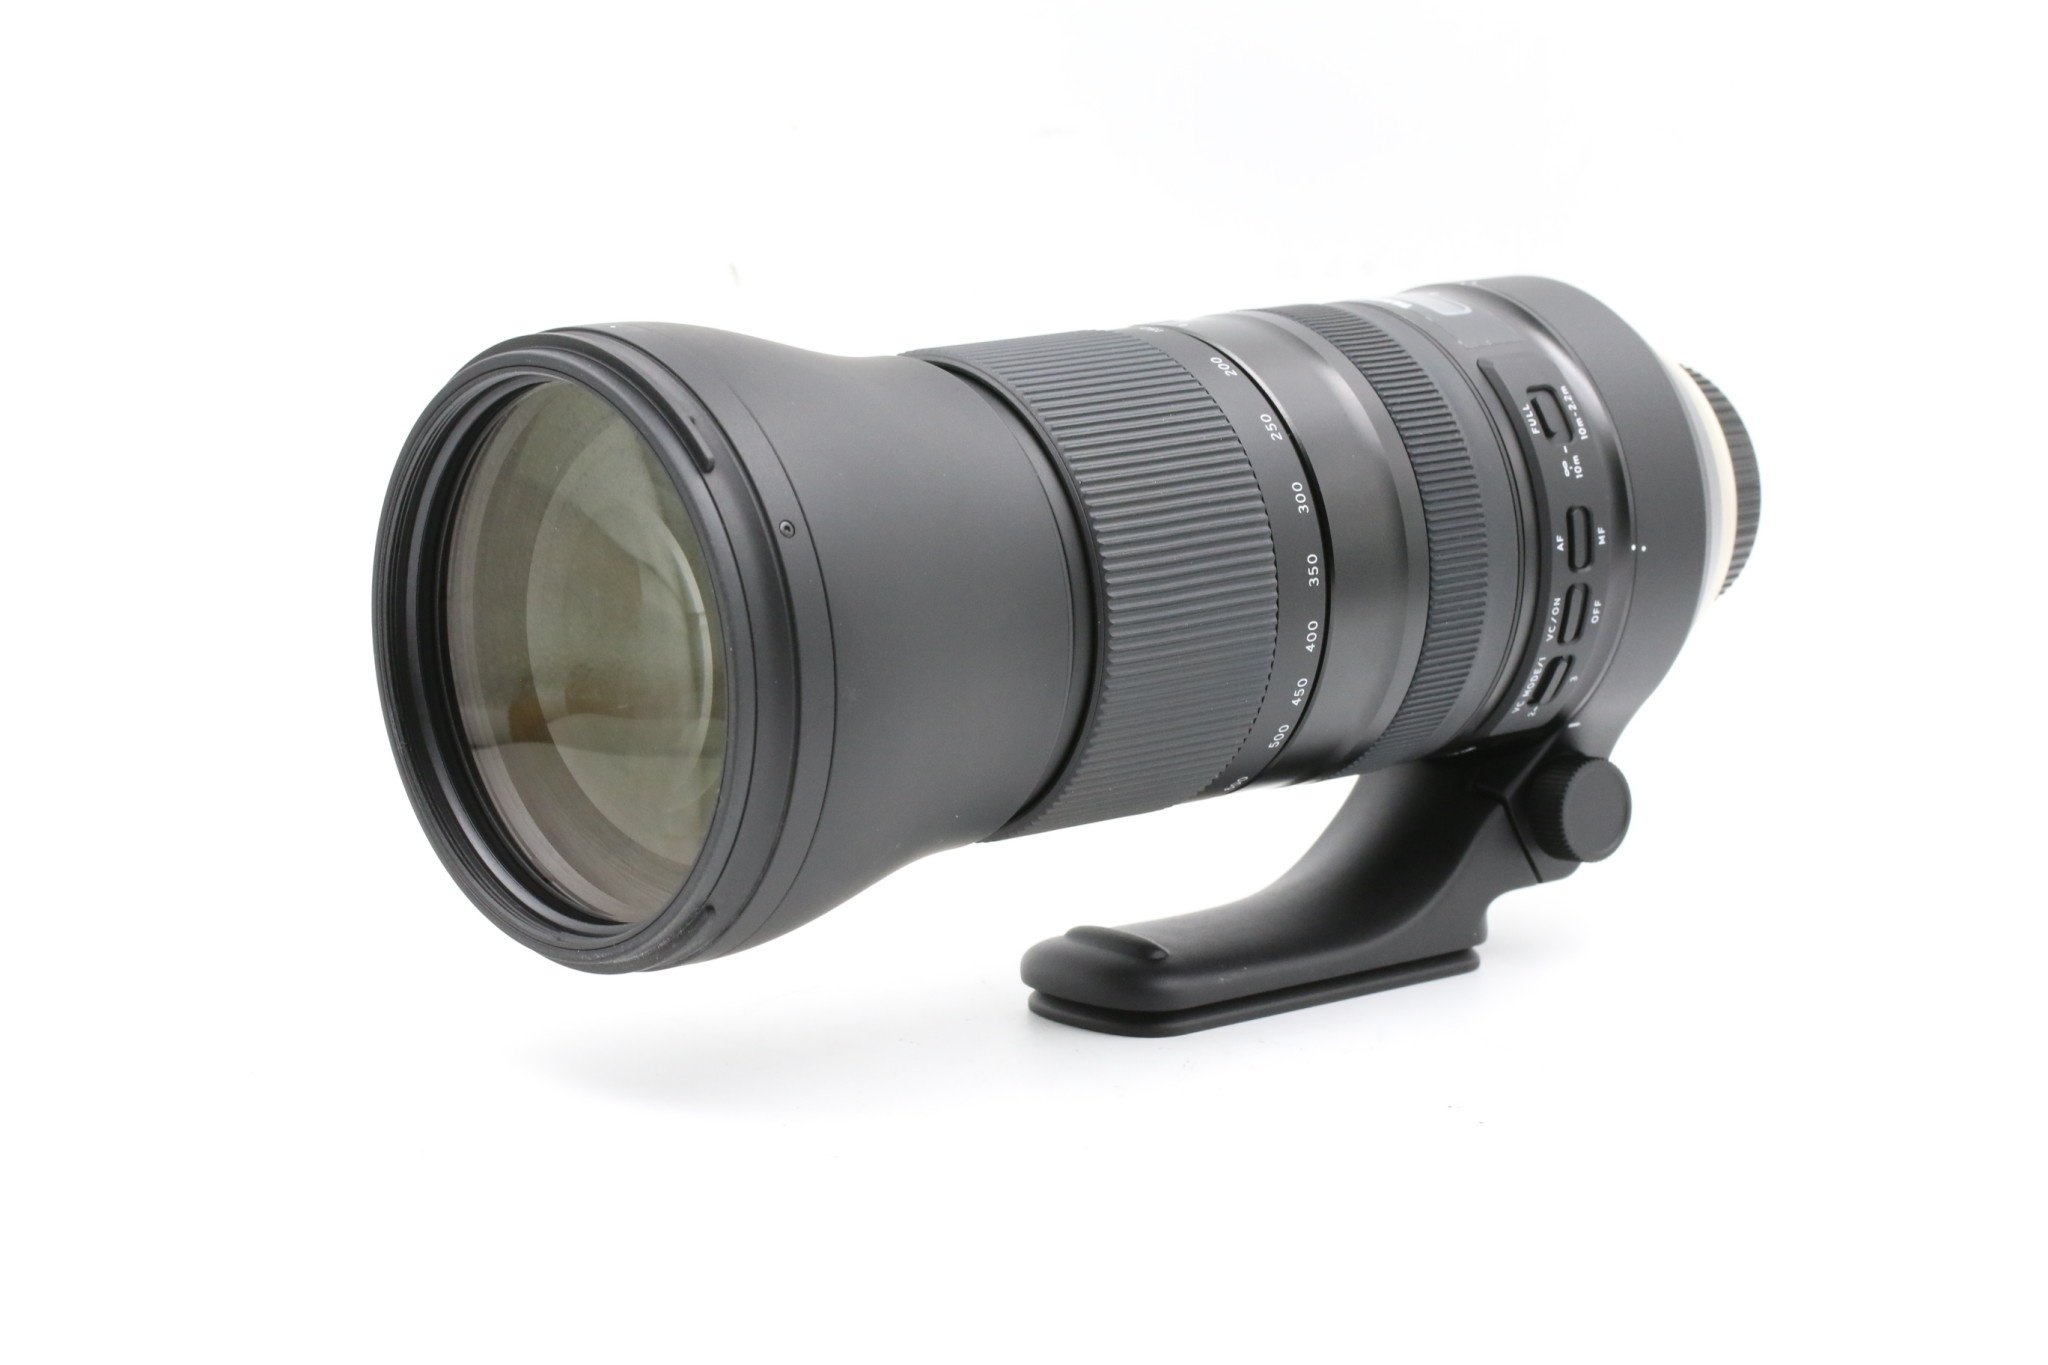 Preowned Tamron SP 150-600mm F5-6.3 Di VC G2 for Nikon F-Mount ...